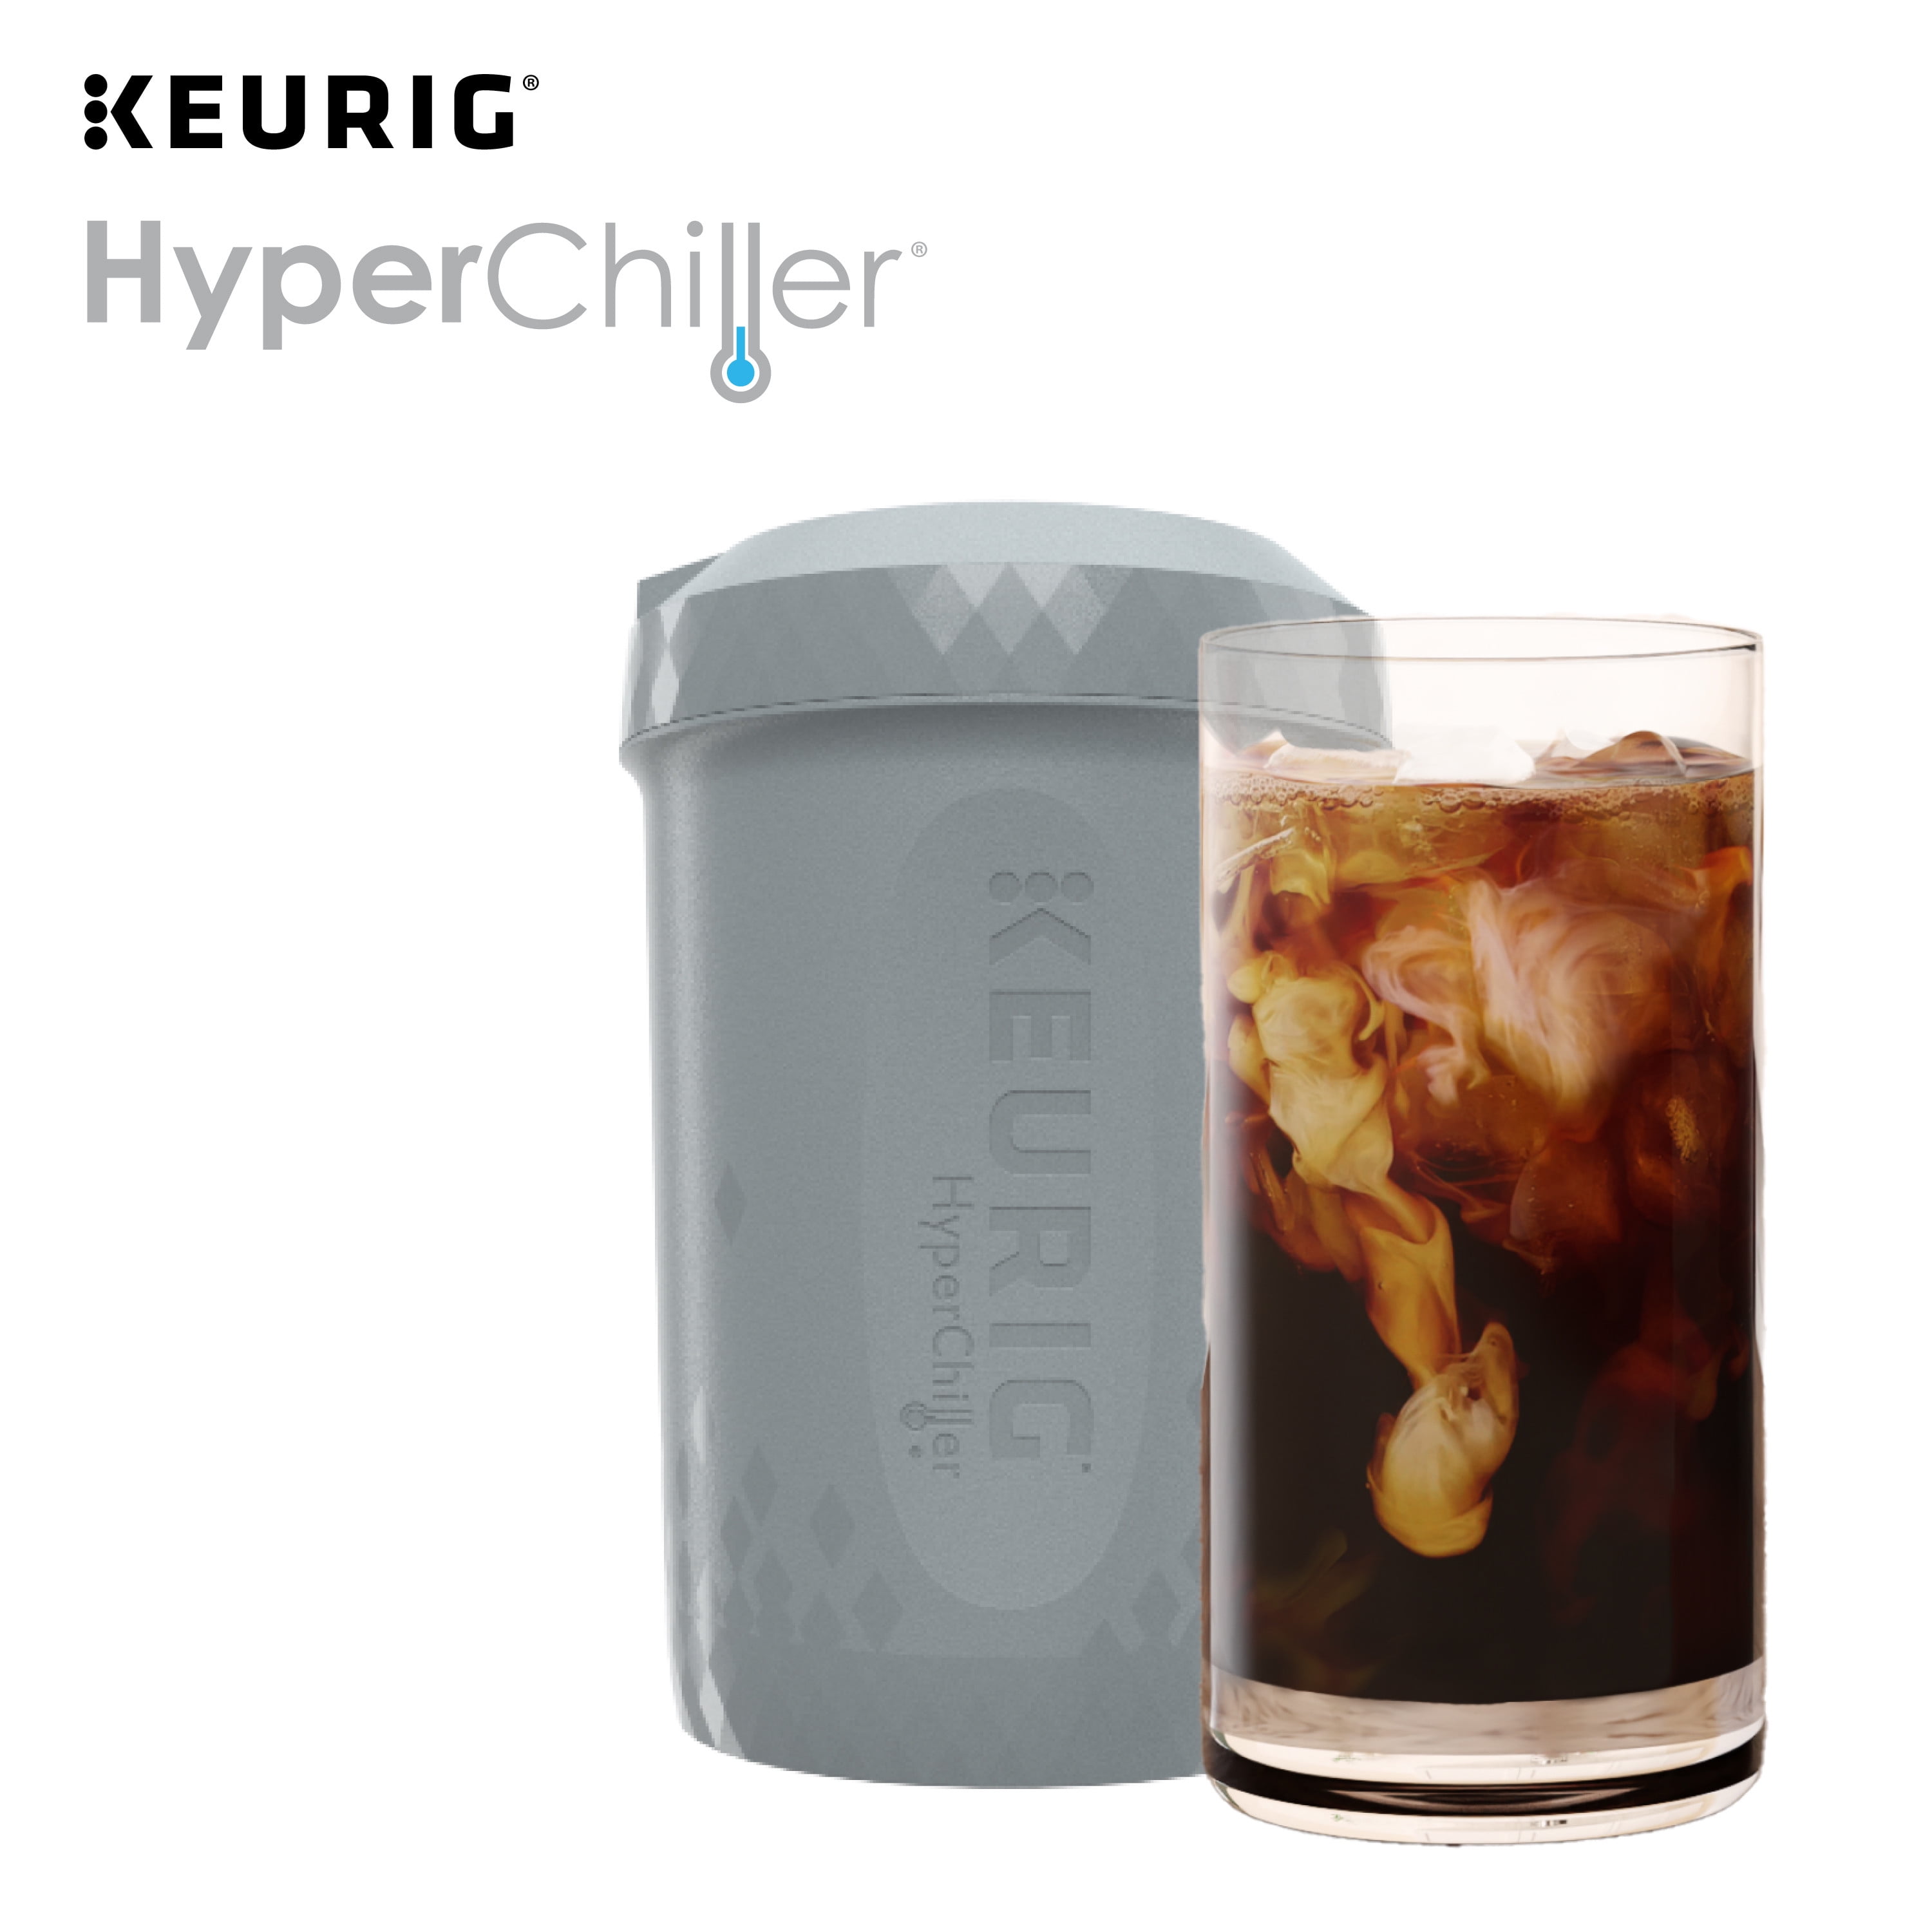 HyperChiller iced coffee maker deal: Lowest price on